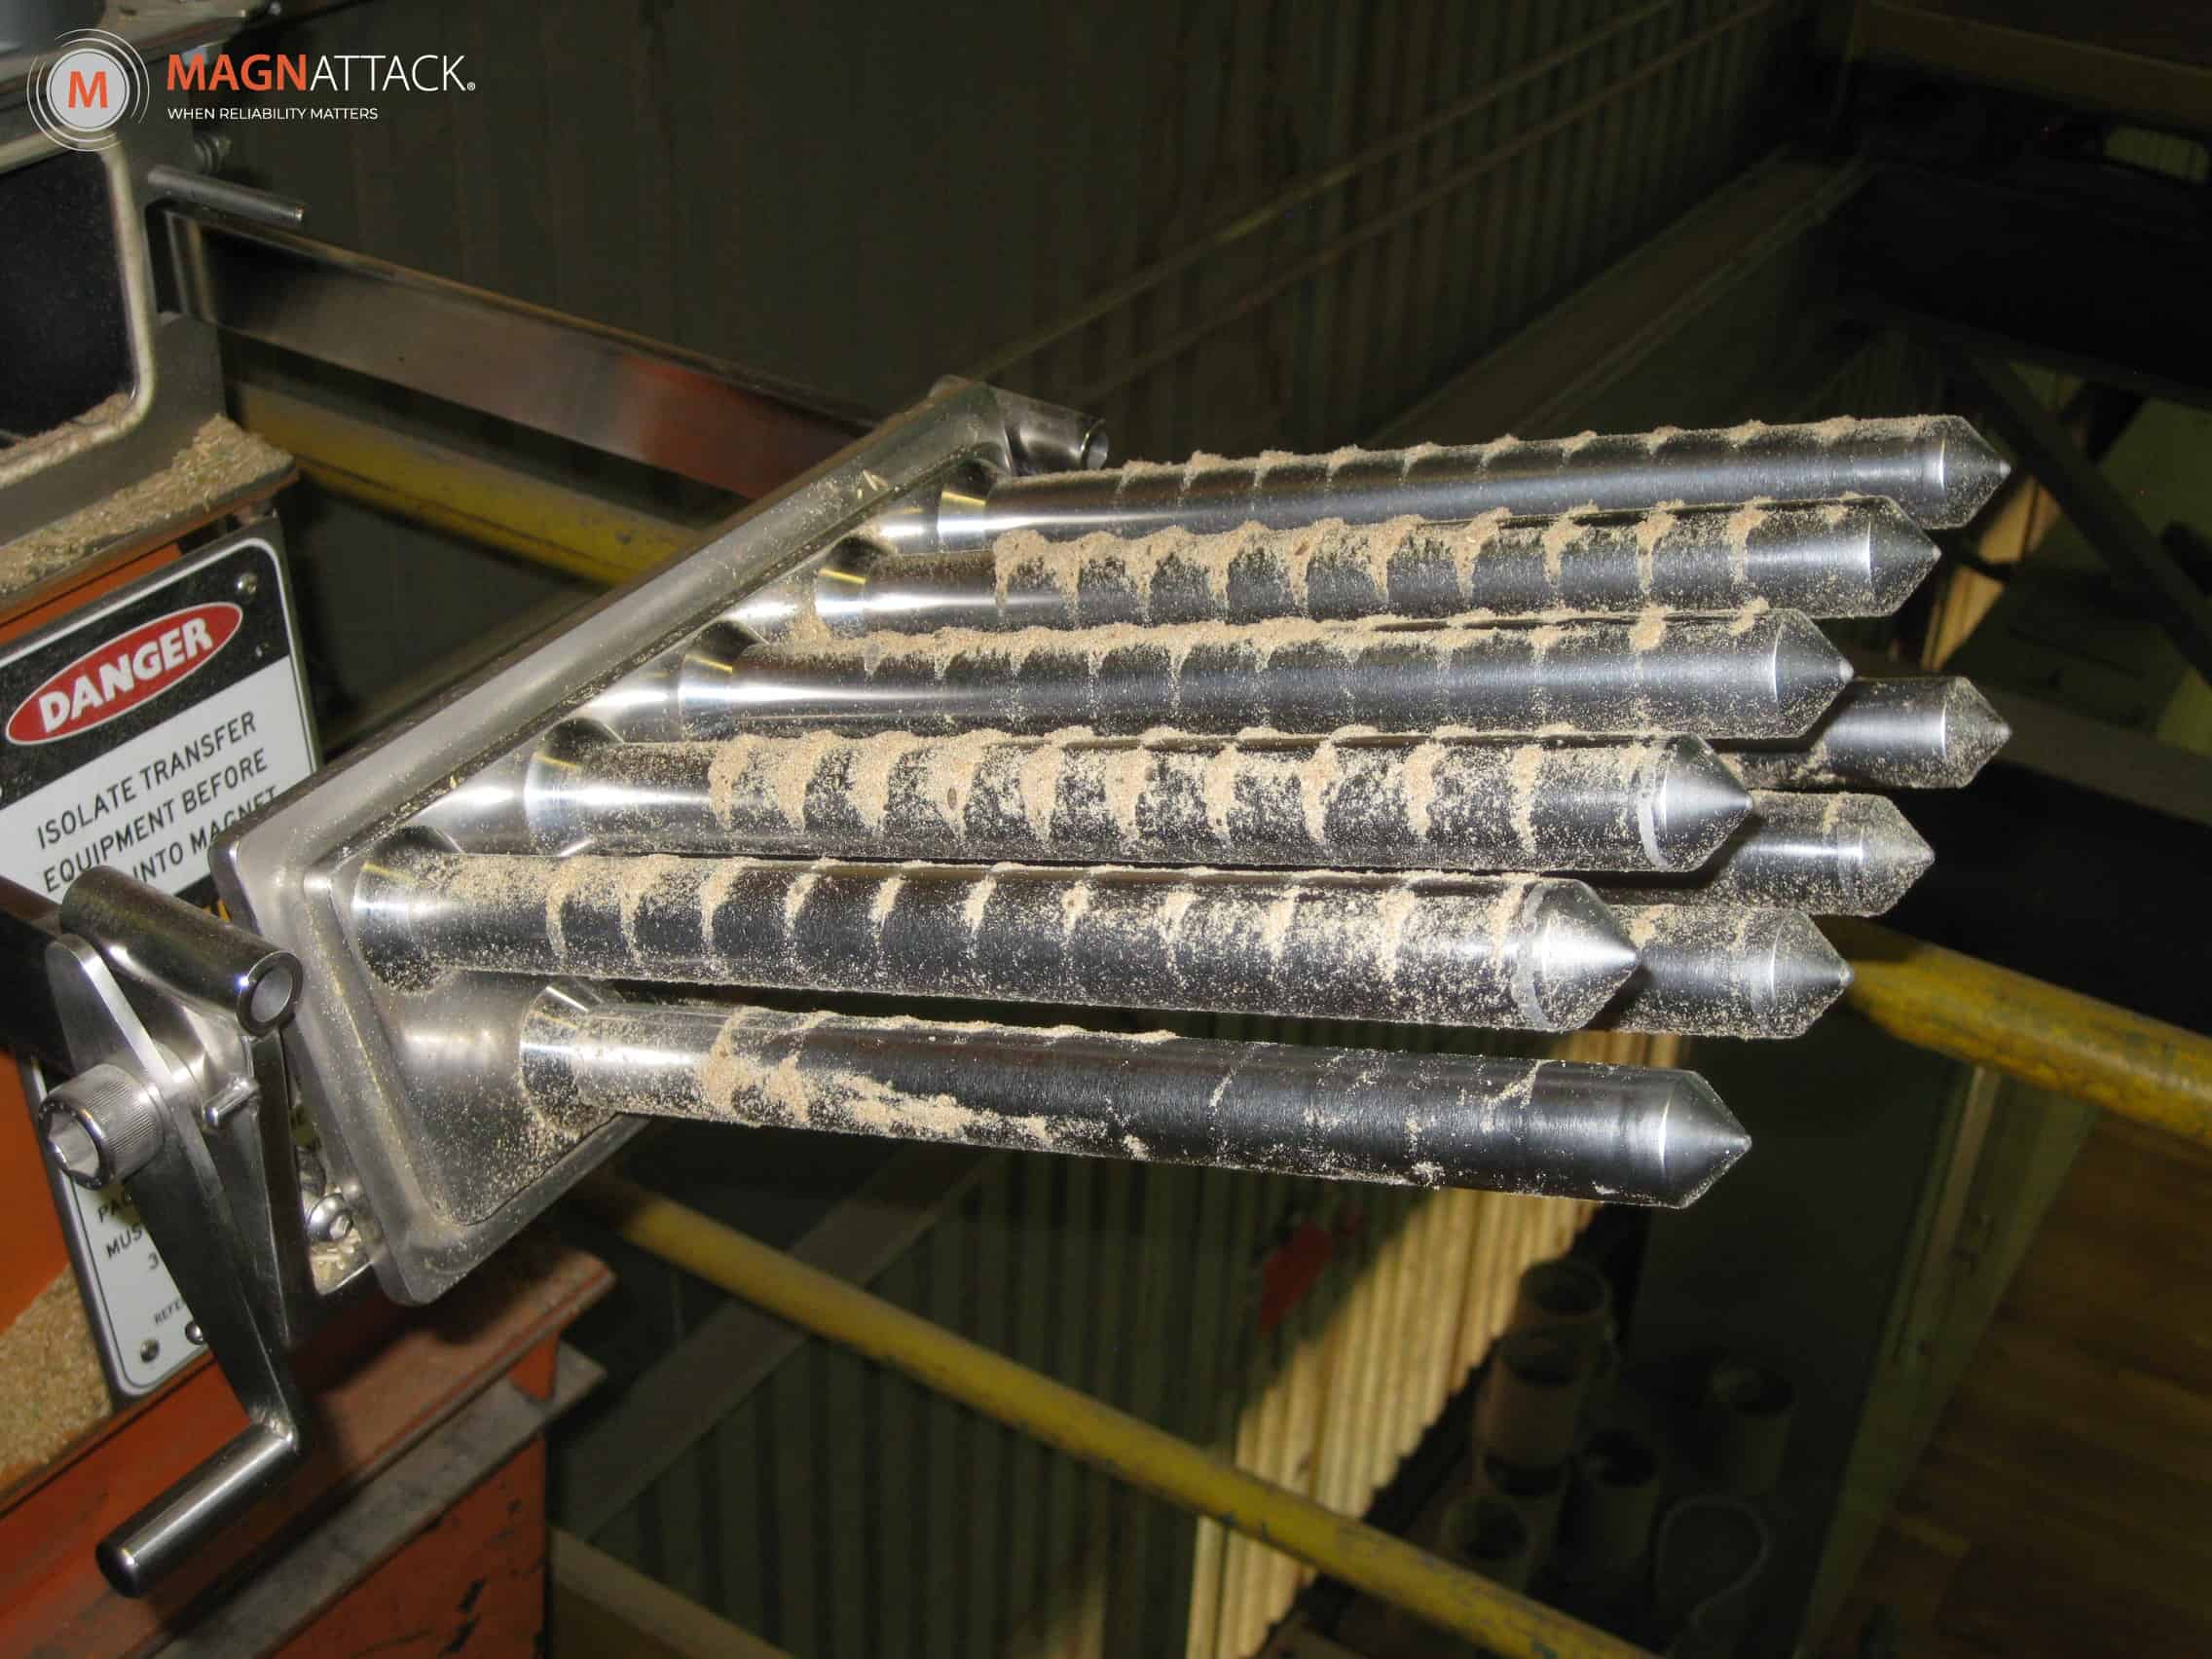 The Magnattack® Rapidclean Grate Magnet installed at a mill, ready for cleaning 